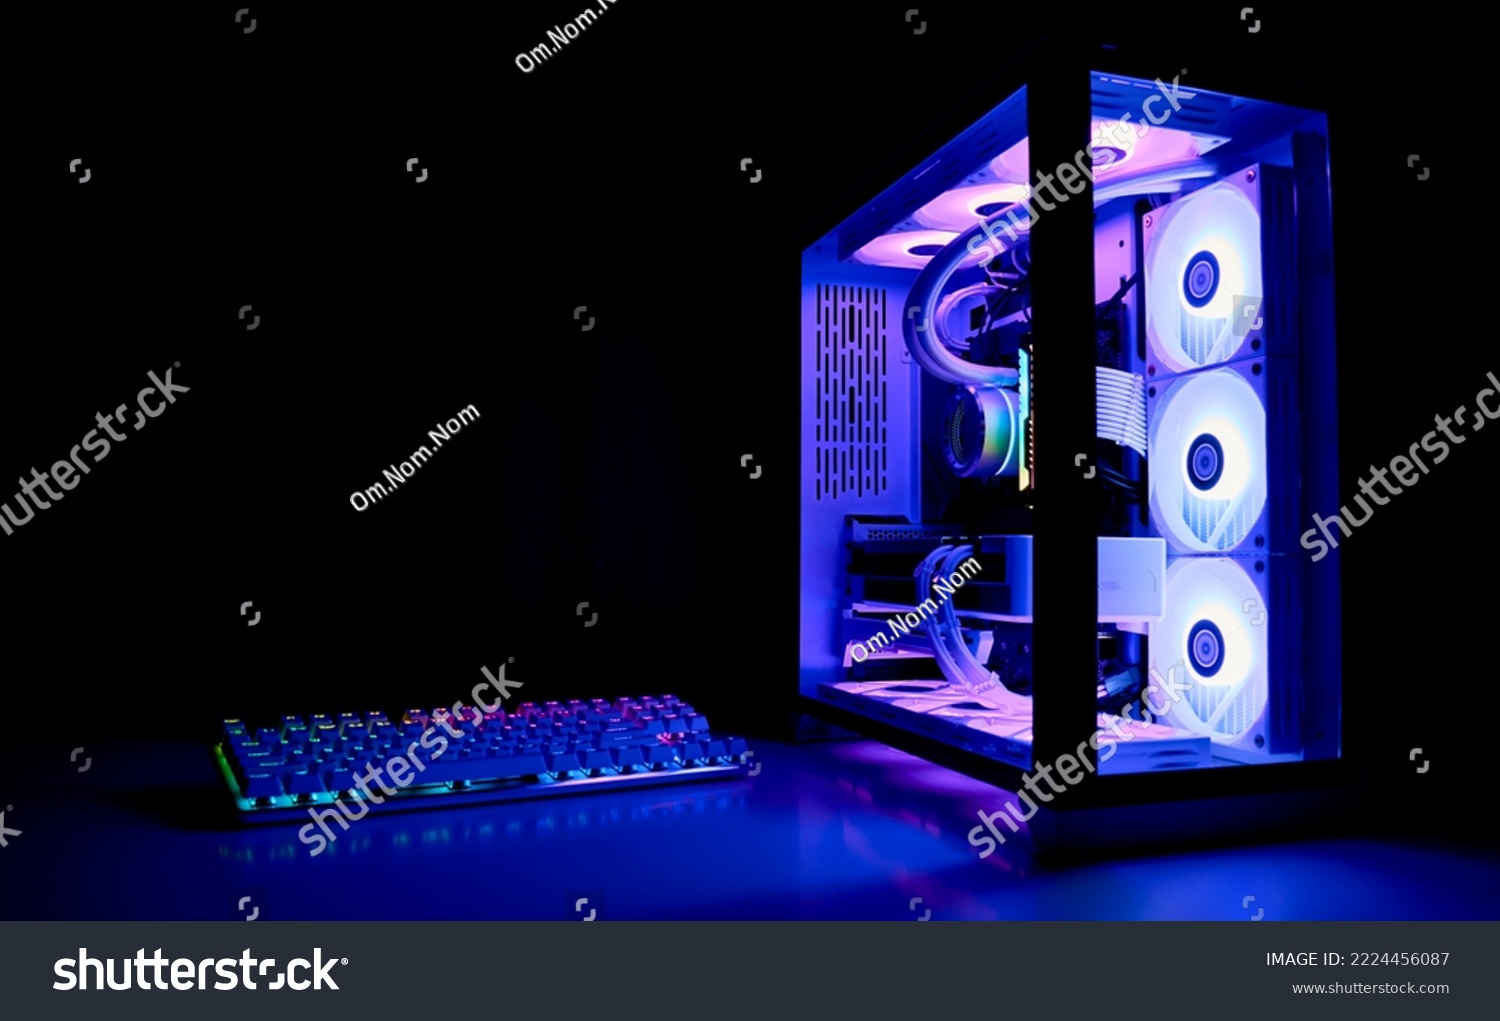 Water Cooled Gaming Pc with RGB rainbow LED lighting. Modern gaming computer with a keyboard in a dark room. Water Liquid Cooling Computer #2224456087